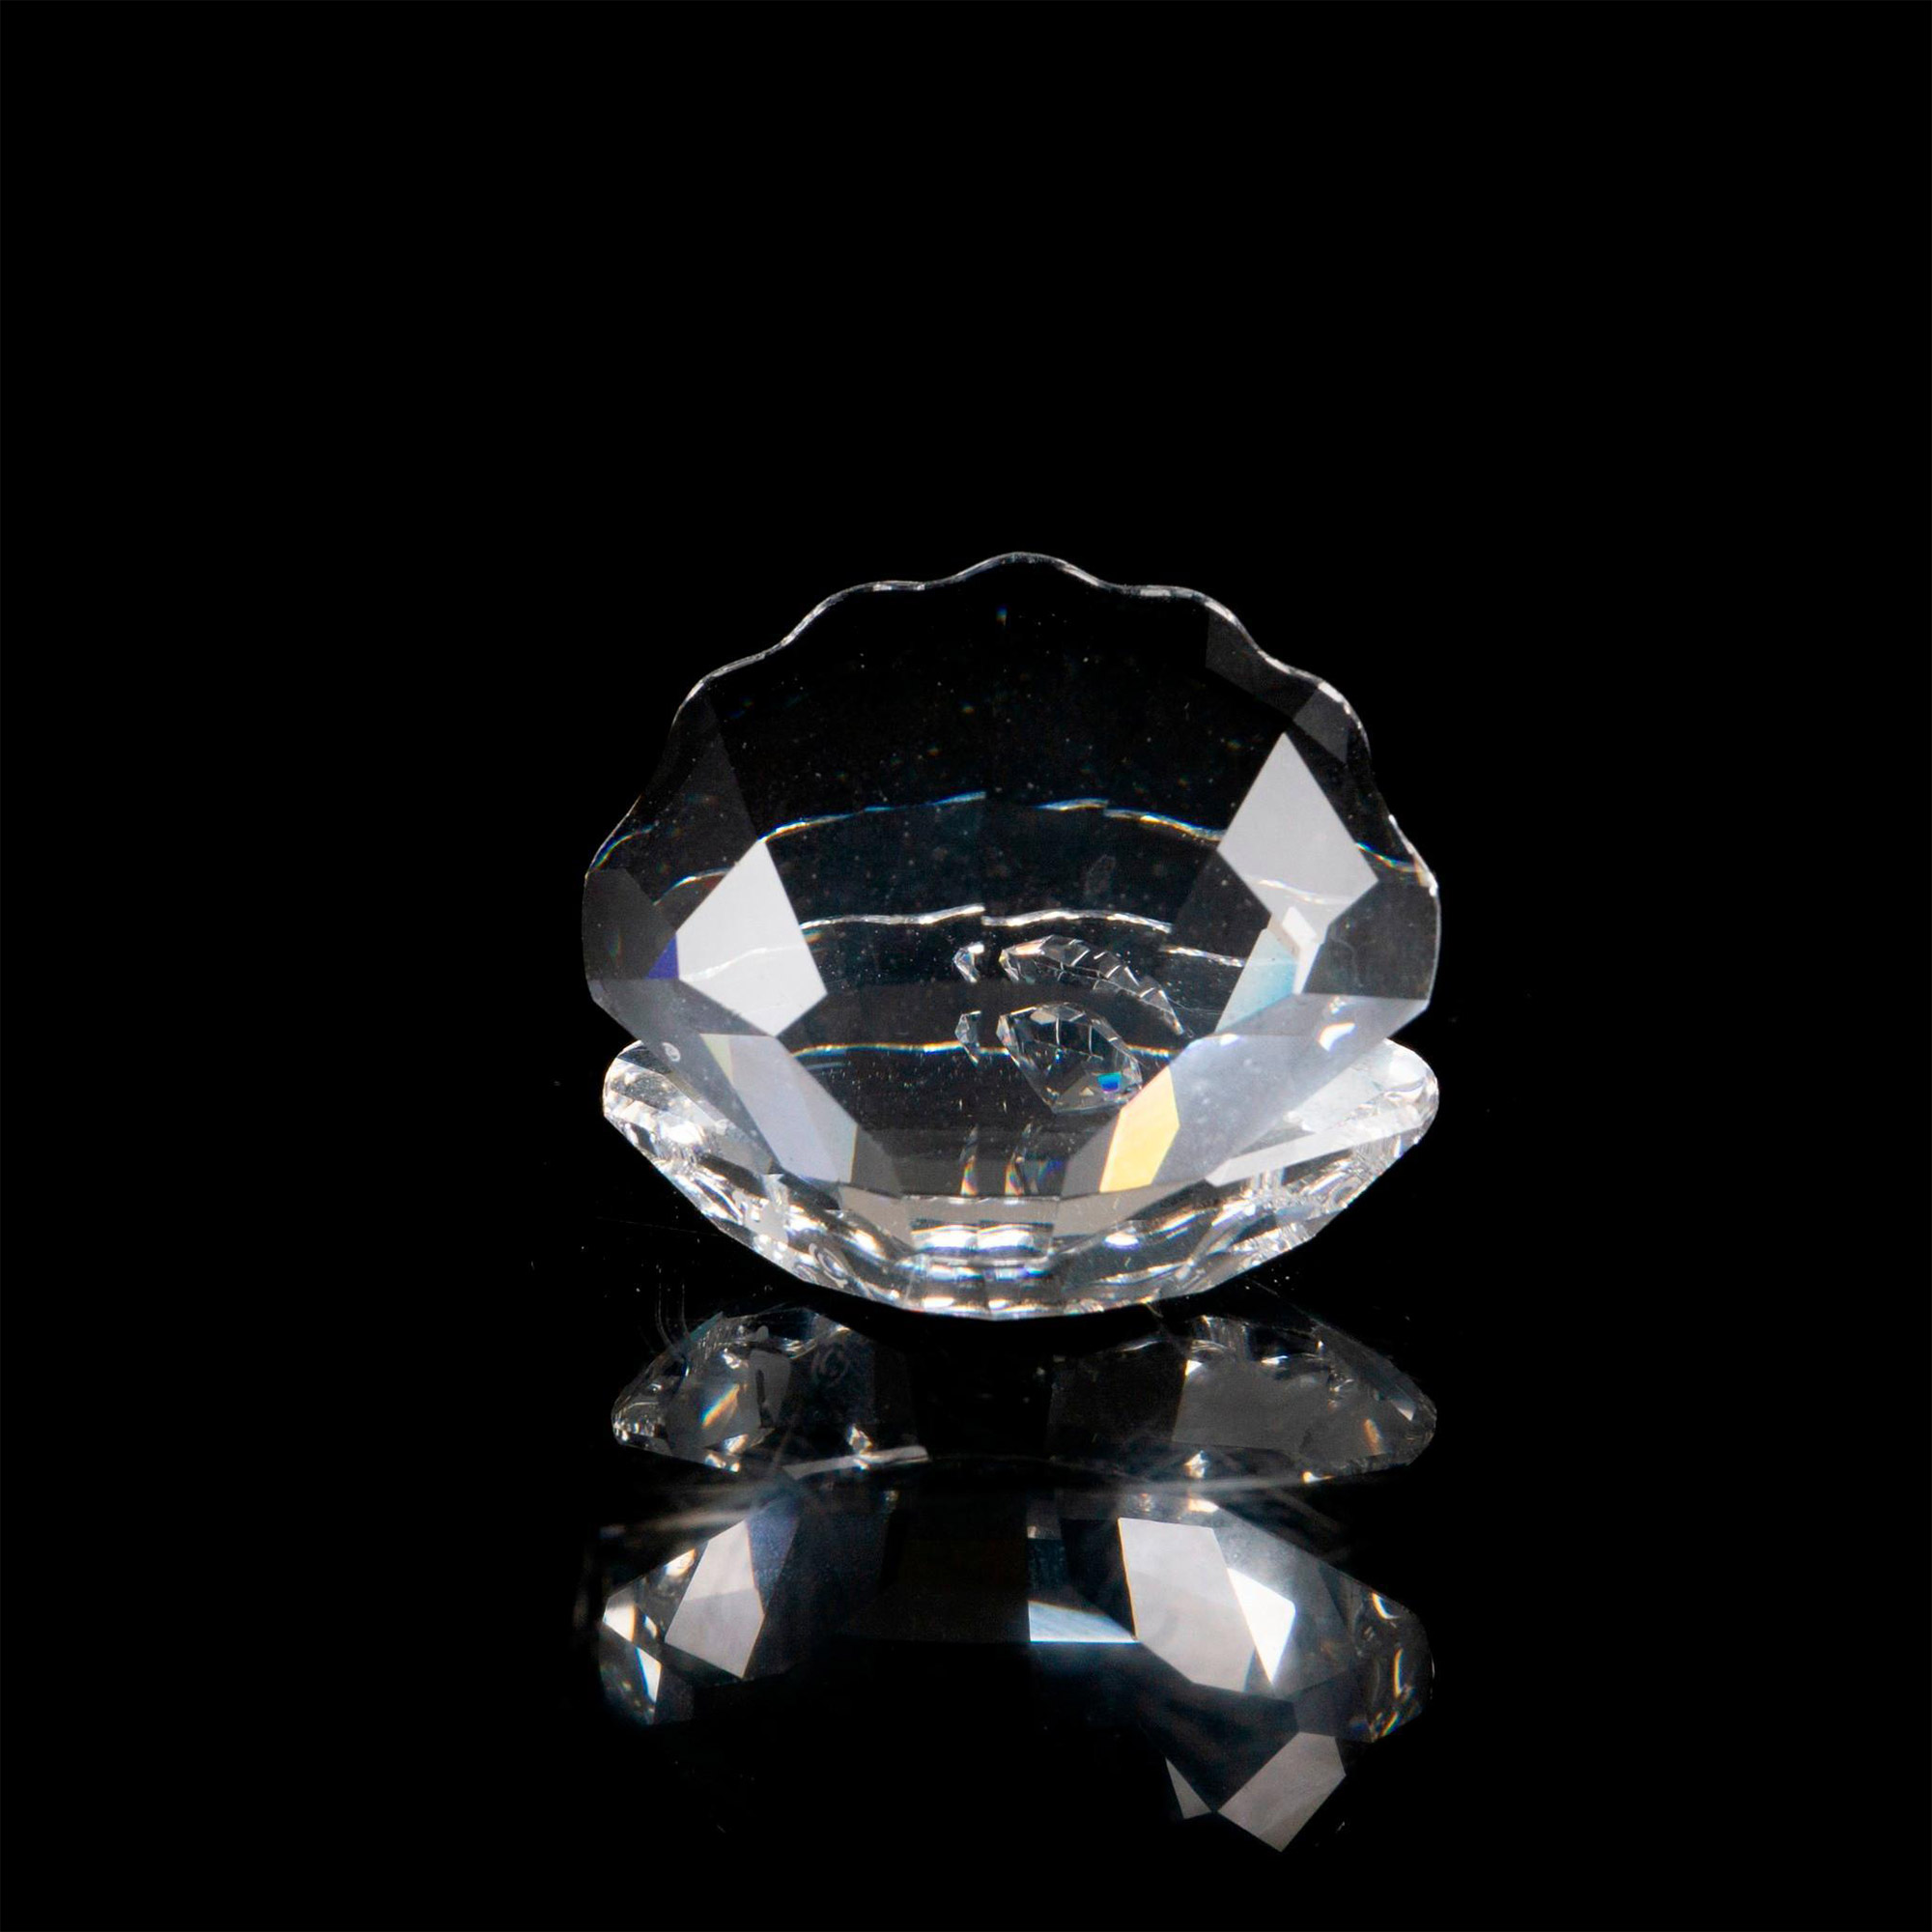 Swarovski Silver Crystal Figurine, Small Shell with Pearl - Image 3 of 4